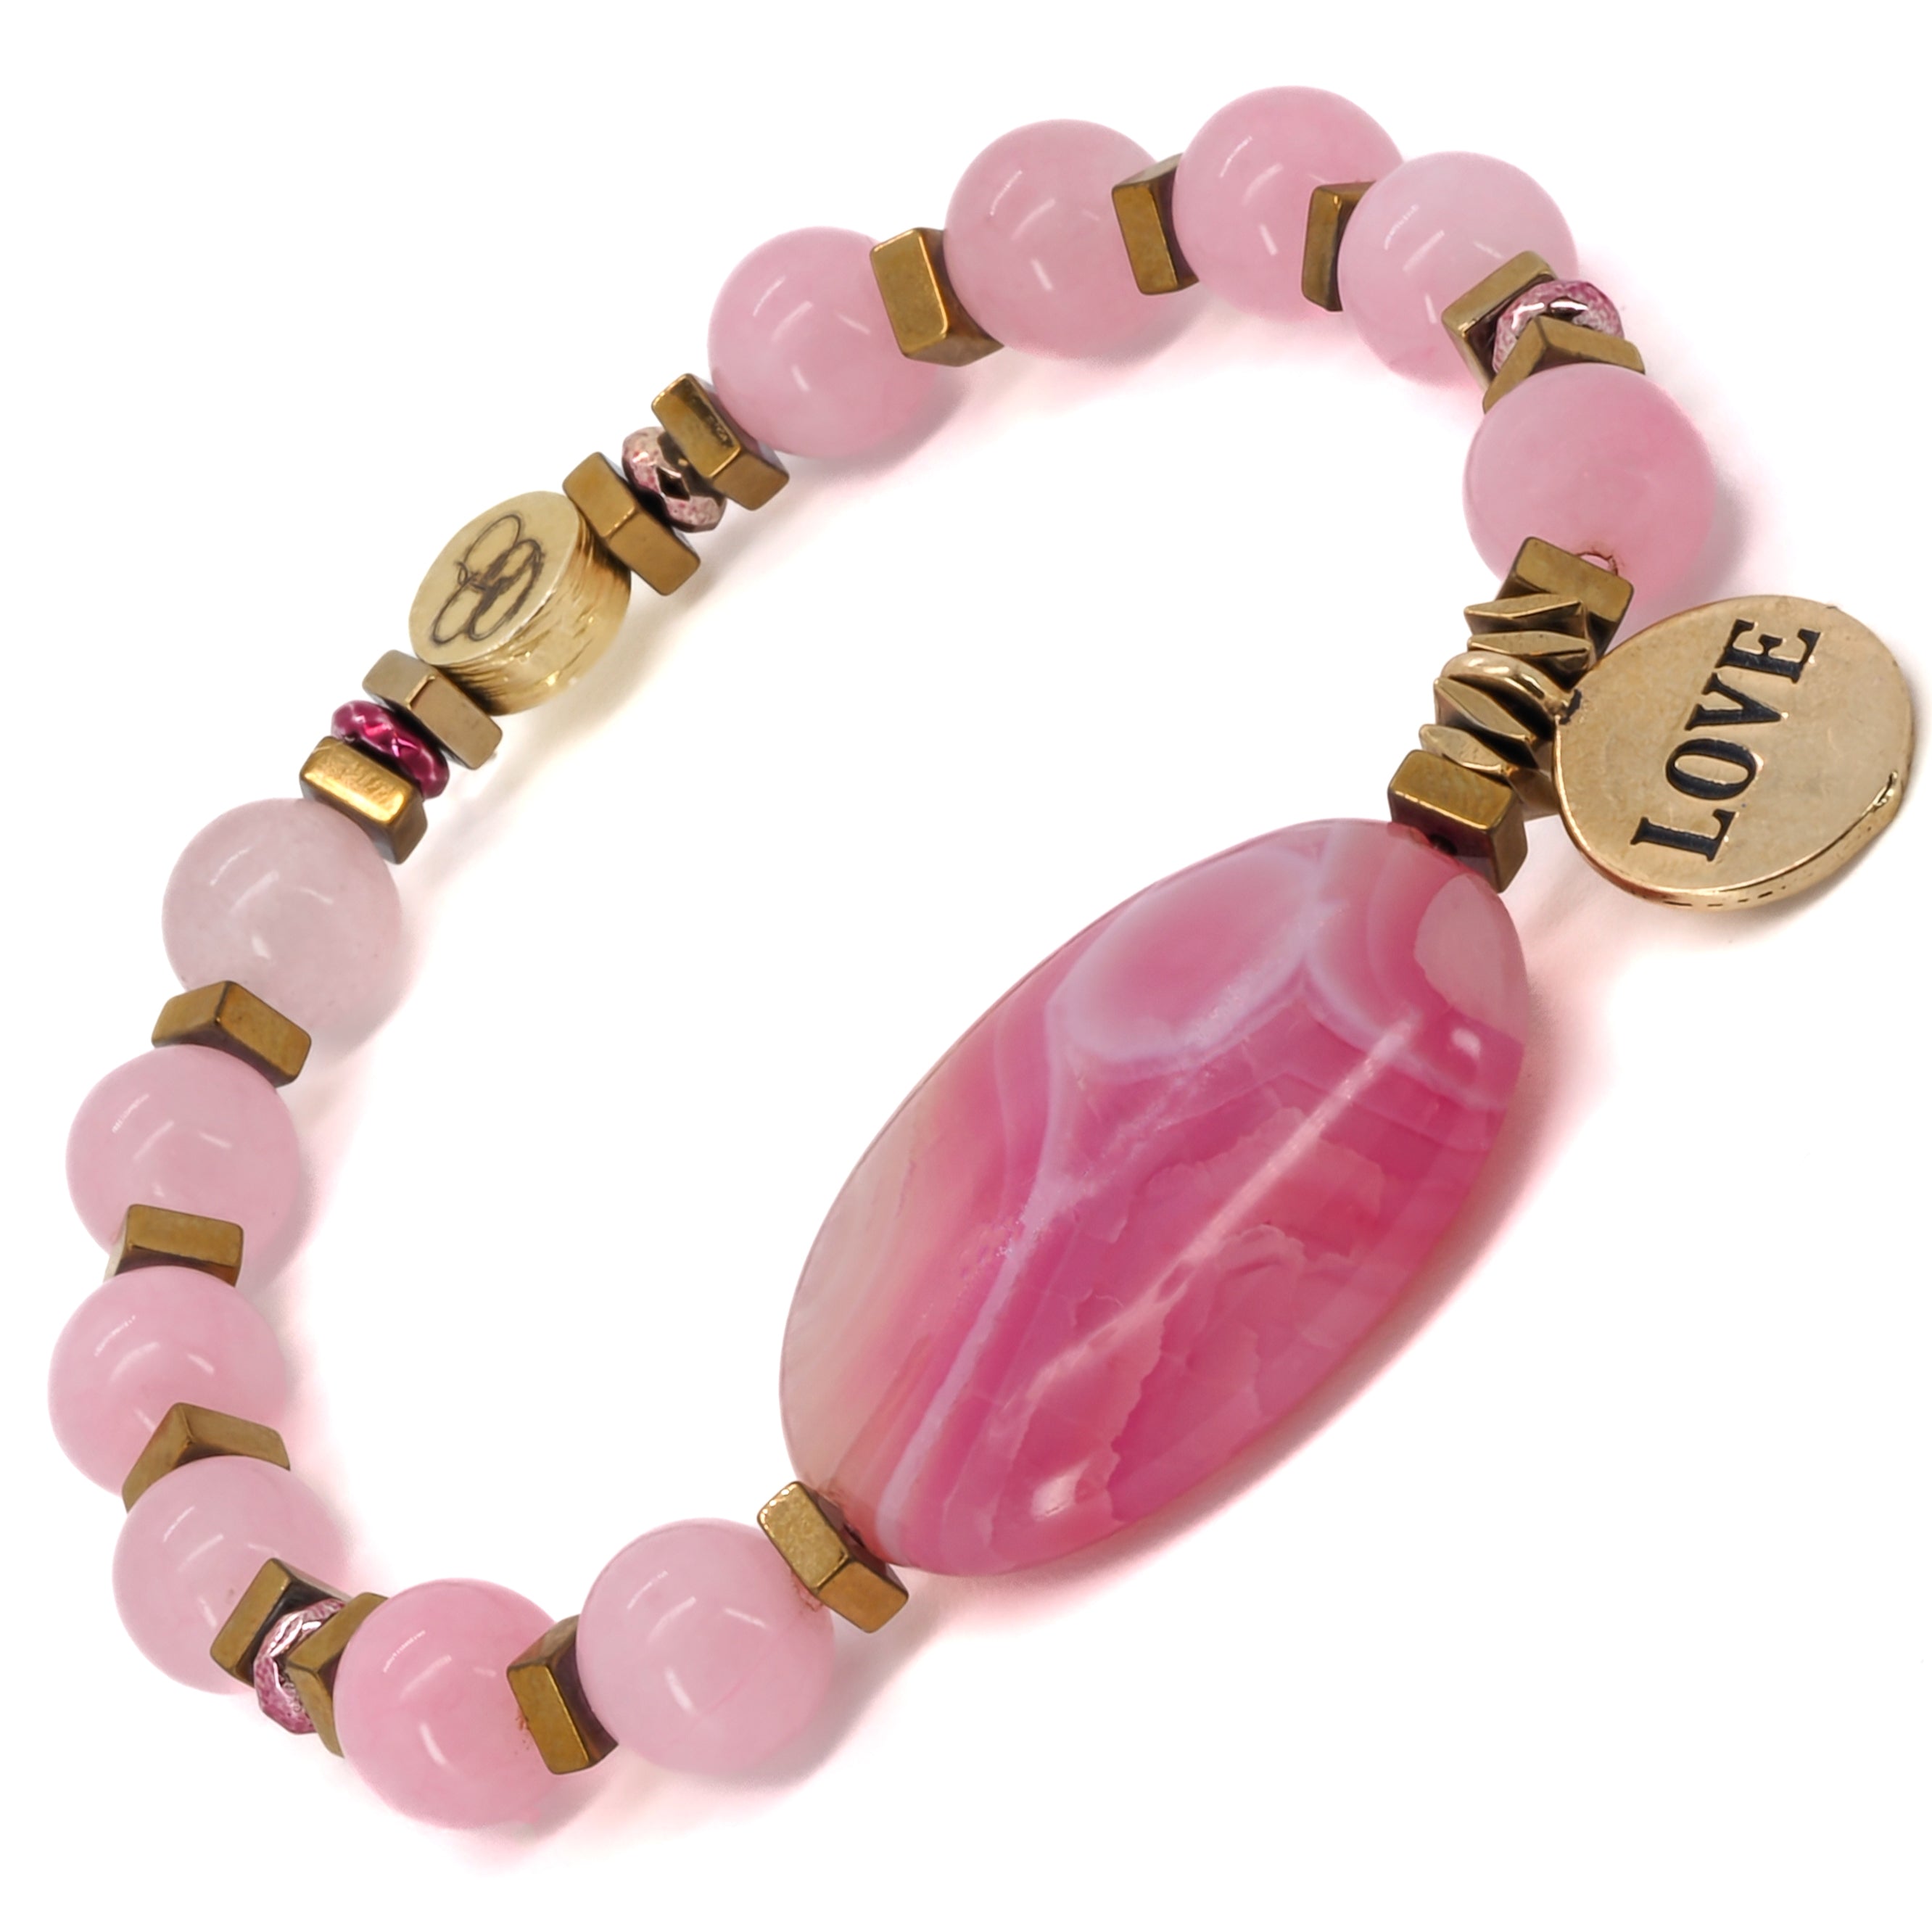 Embrace the balance and stability of the Pink Agate Love Bracelet, adorned with pink agate stones and a bronze love charm.